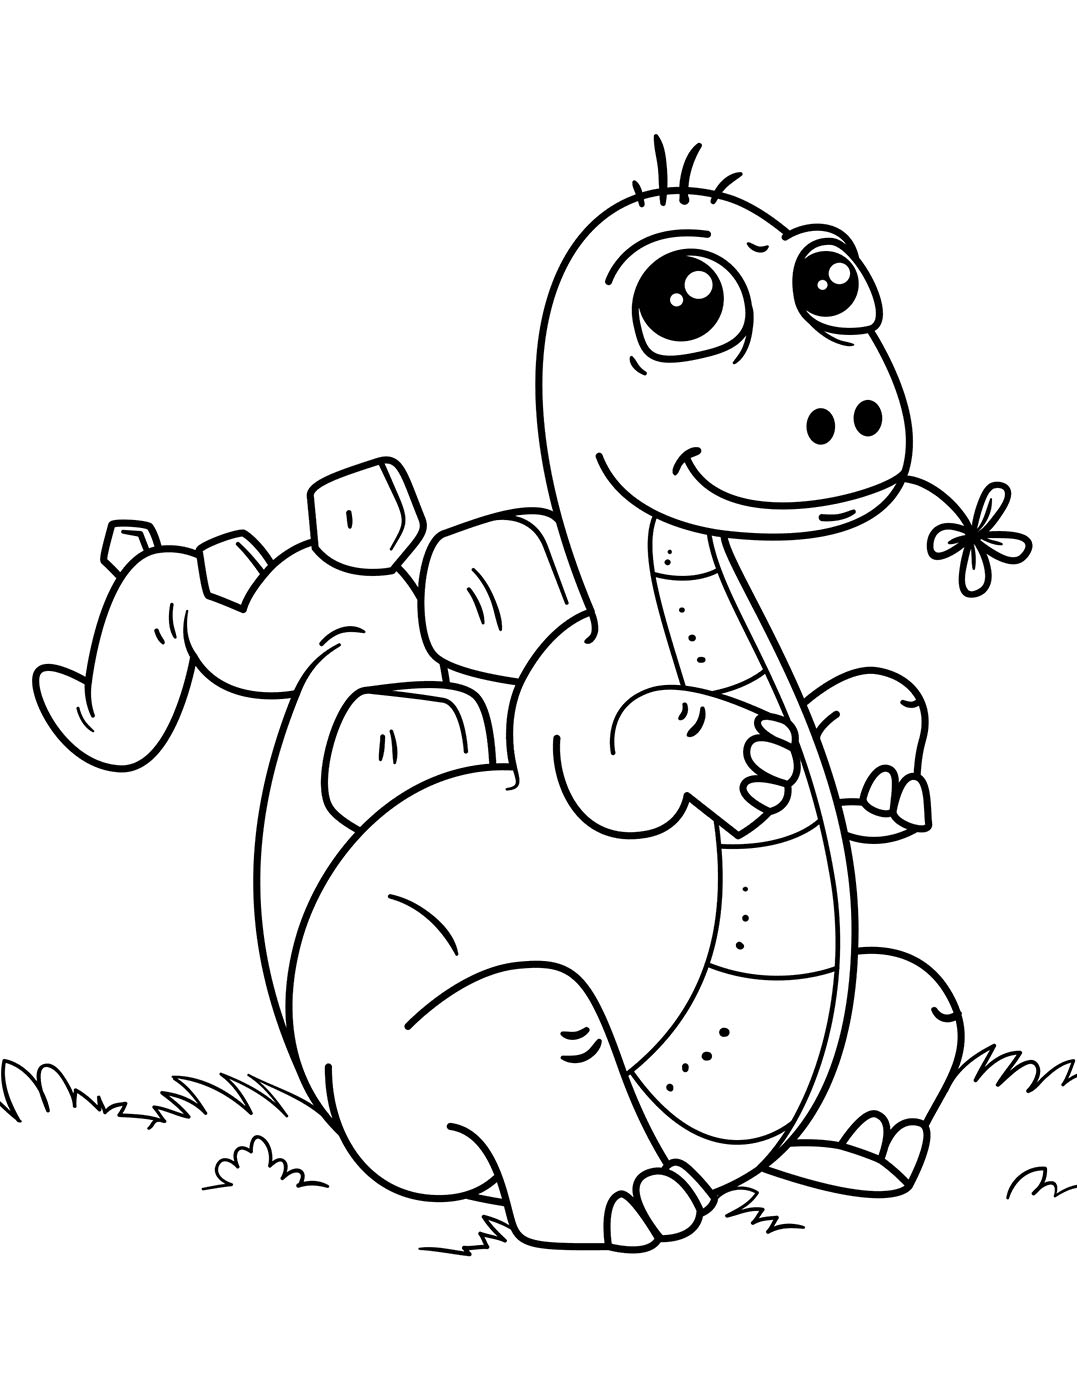 Dinosaurs to color for kids : Ba - Dinosaurs Kids Coloring ...